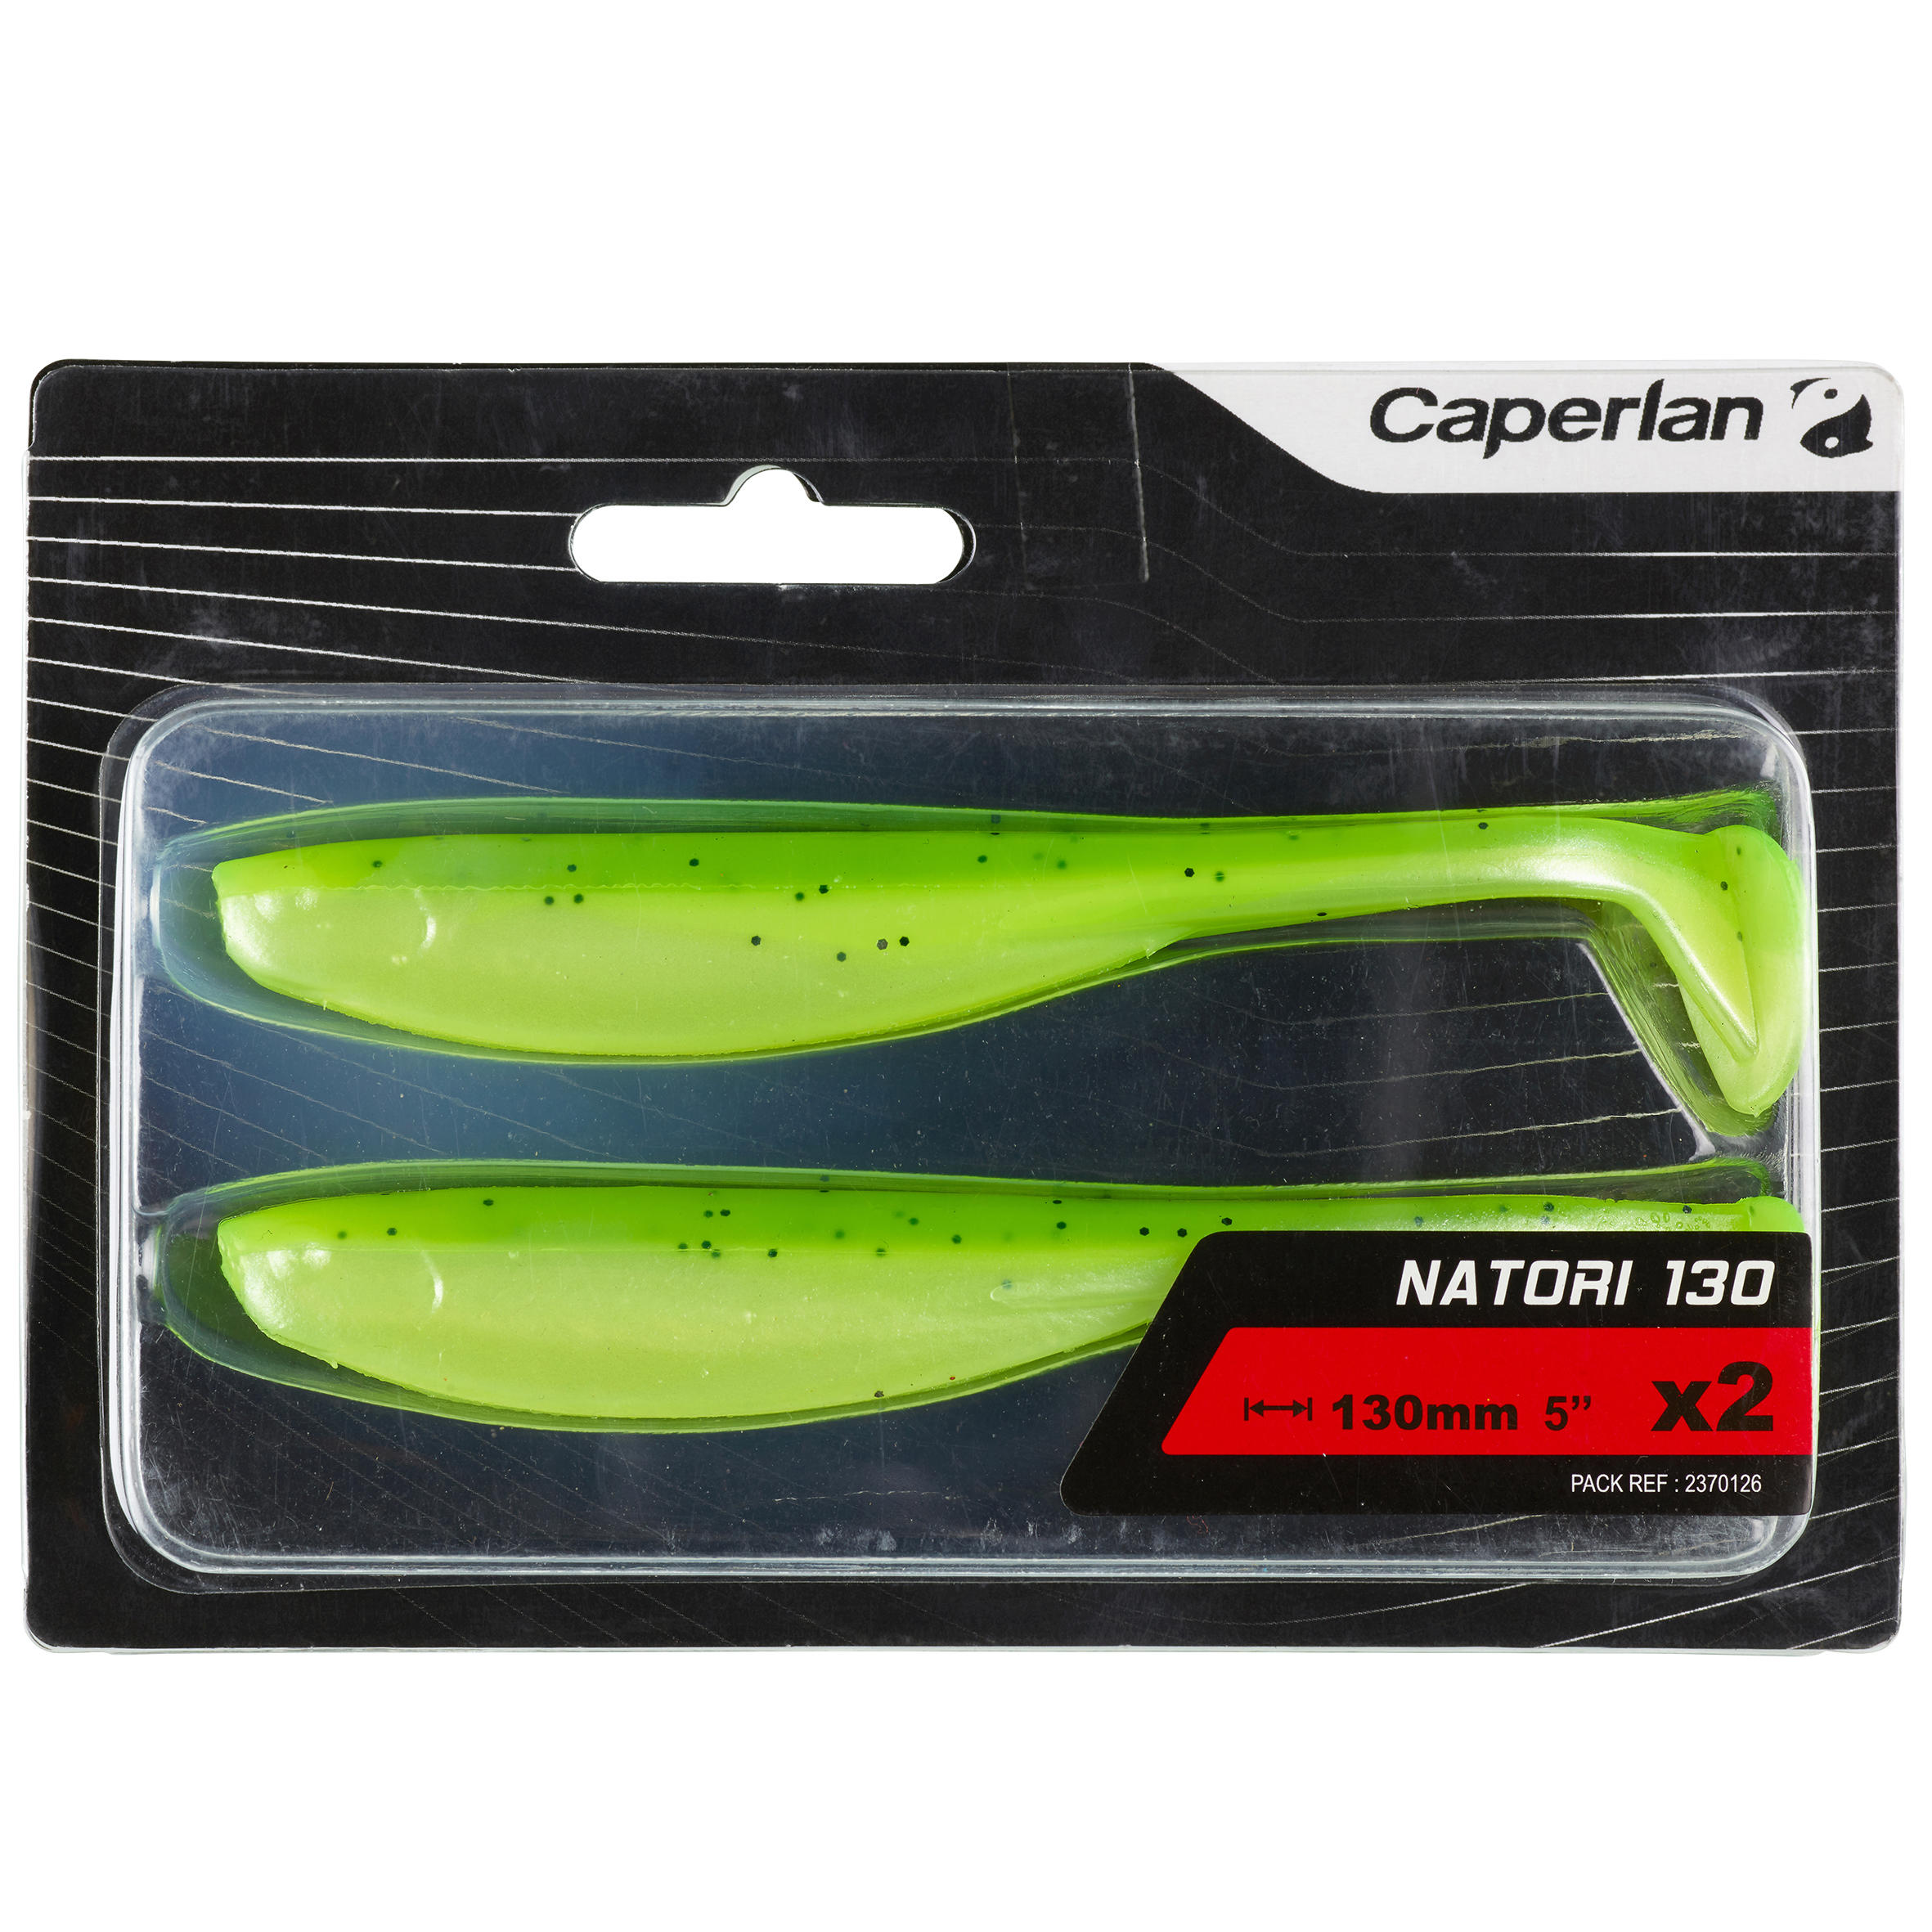 130 lure fishing soft bait kit - Fluo lime, Olive green - Caperlan